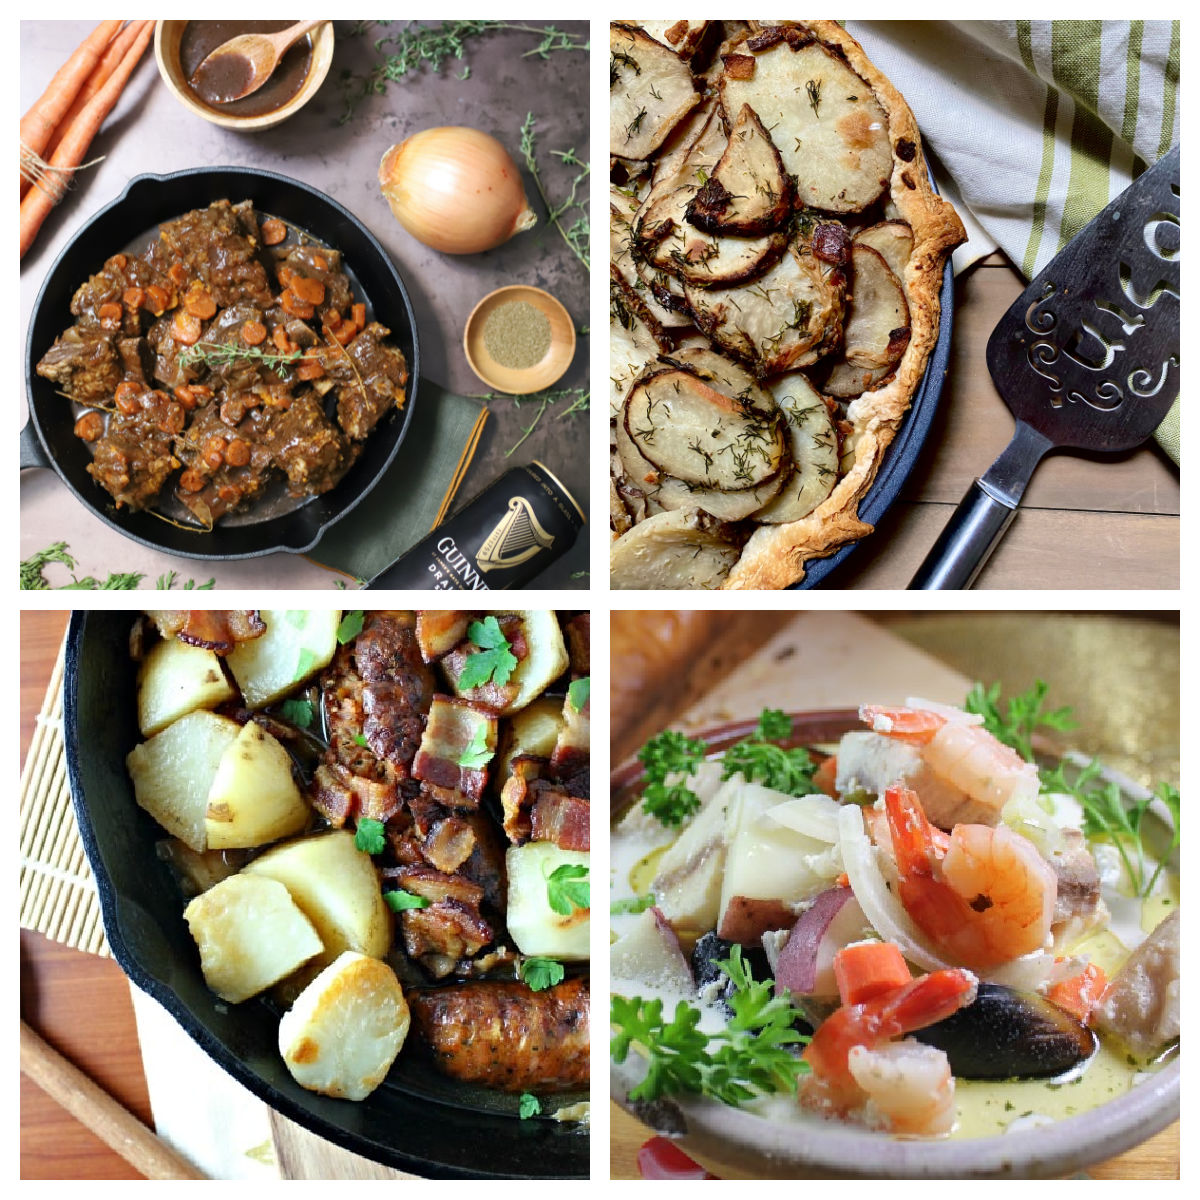 St. Patrick's Day dinner recipe ideas collage.